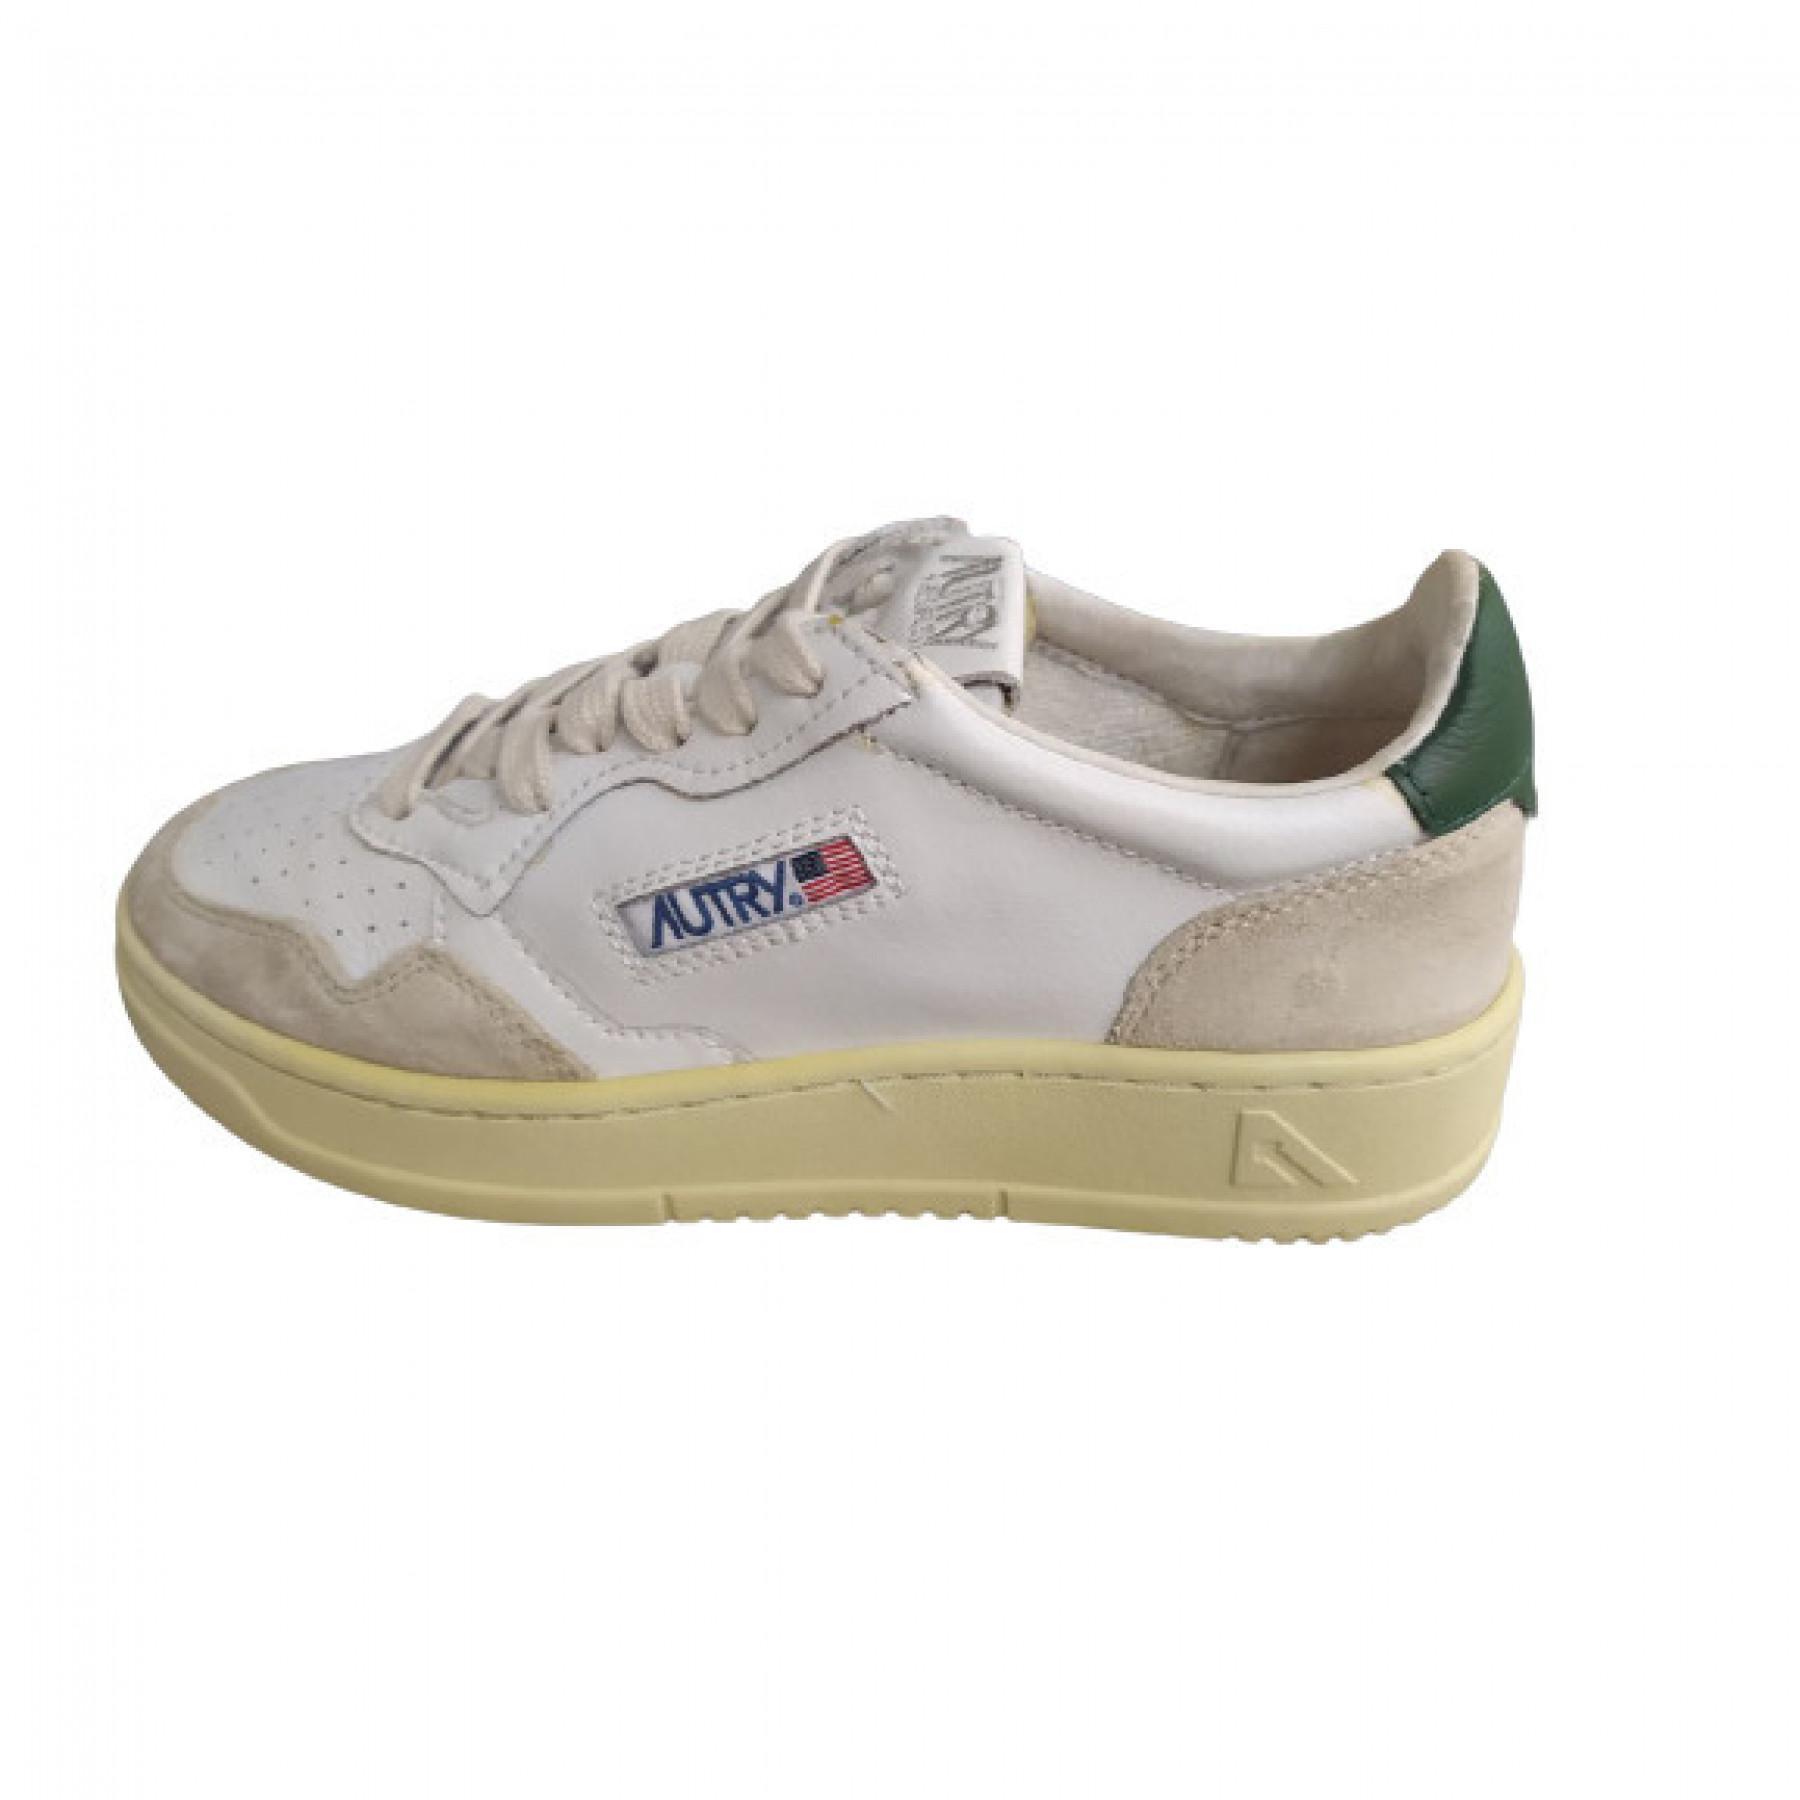 Baskets femme Autry Medalist LS31 Leather White/Green